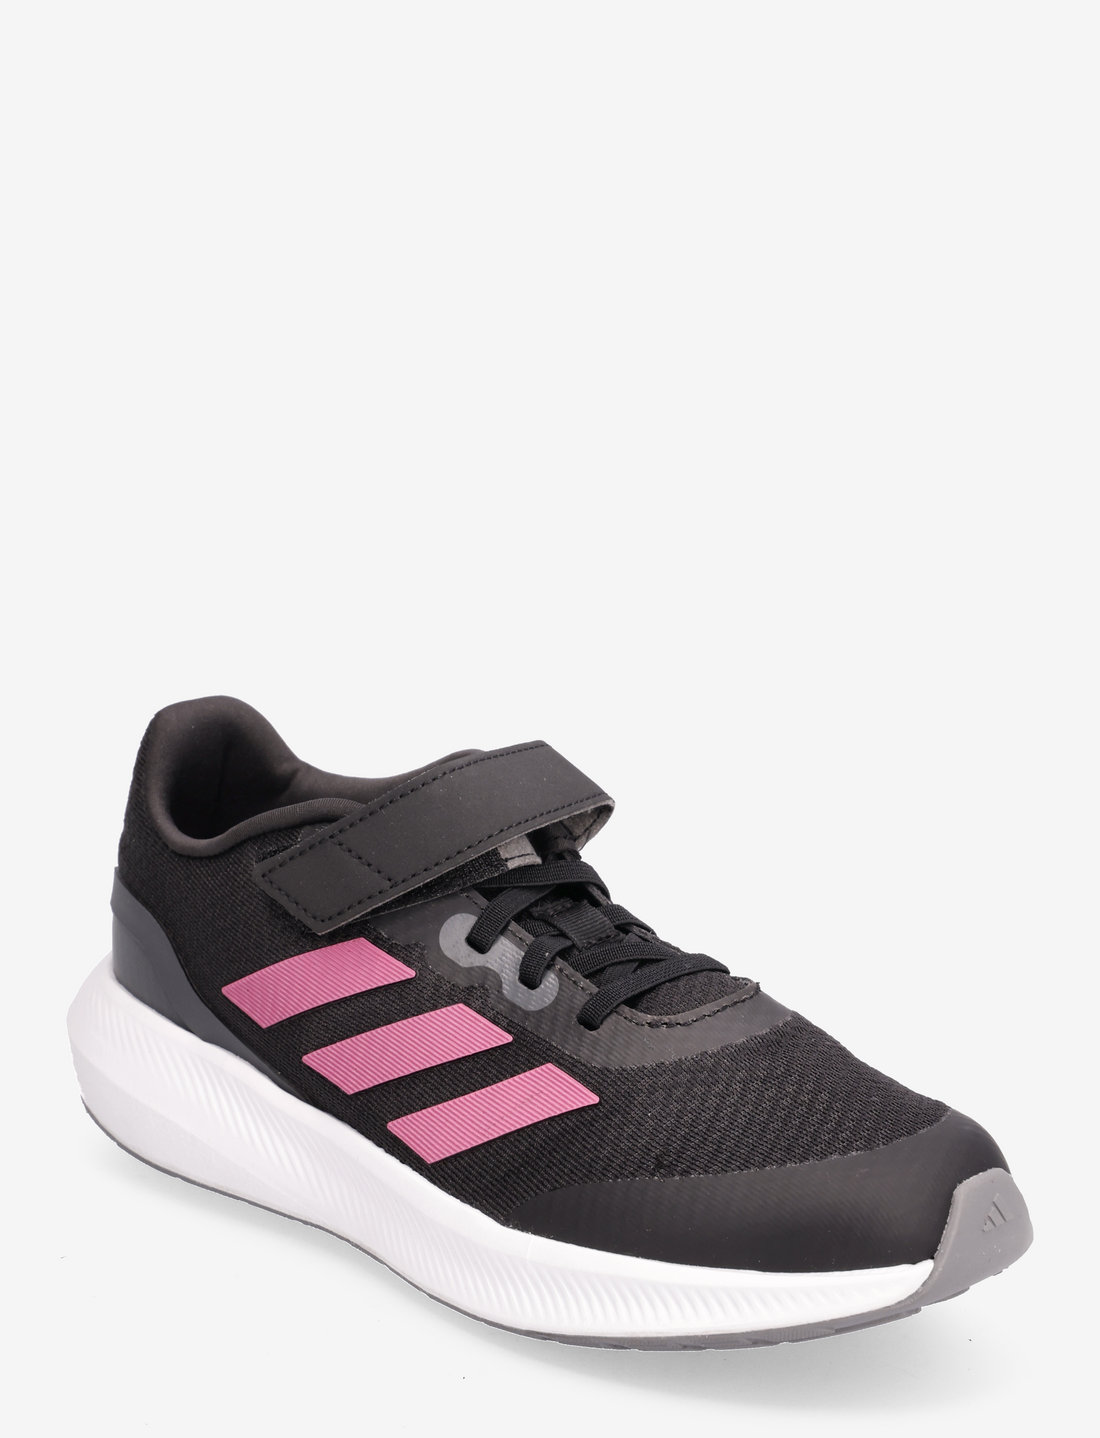 Low Runfalcon - 3.0 adidas Strap Elastic Lace Tops Sportswear Shoes Top